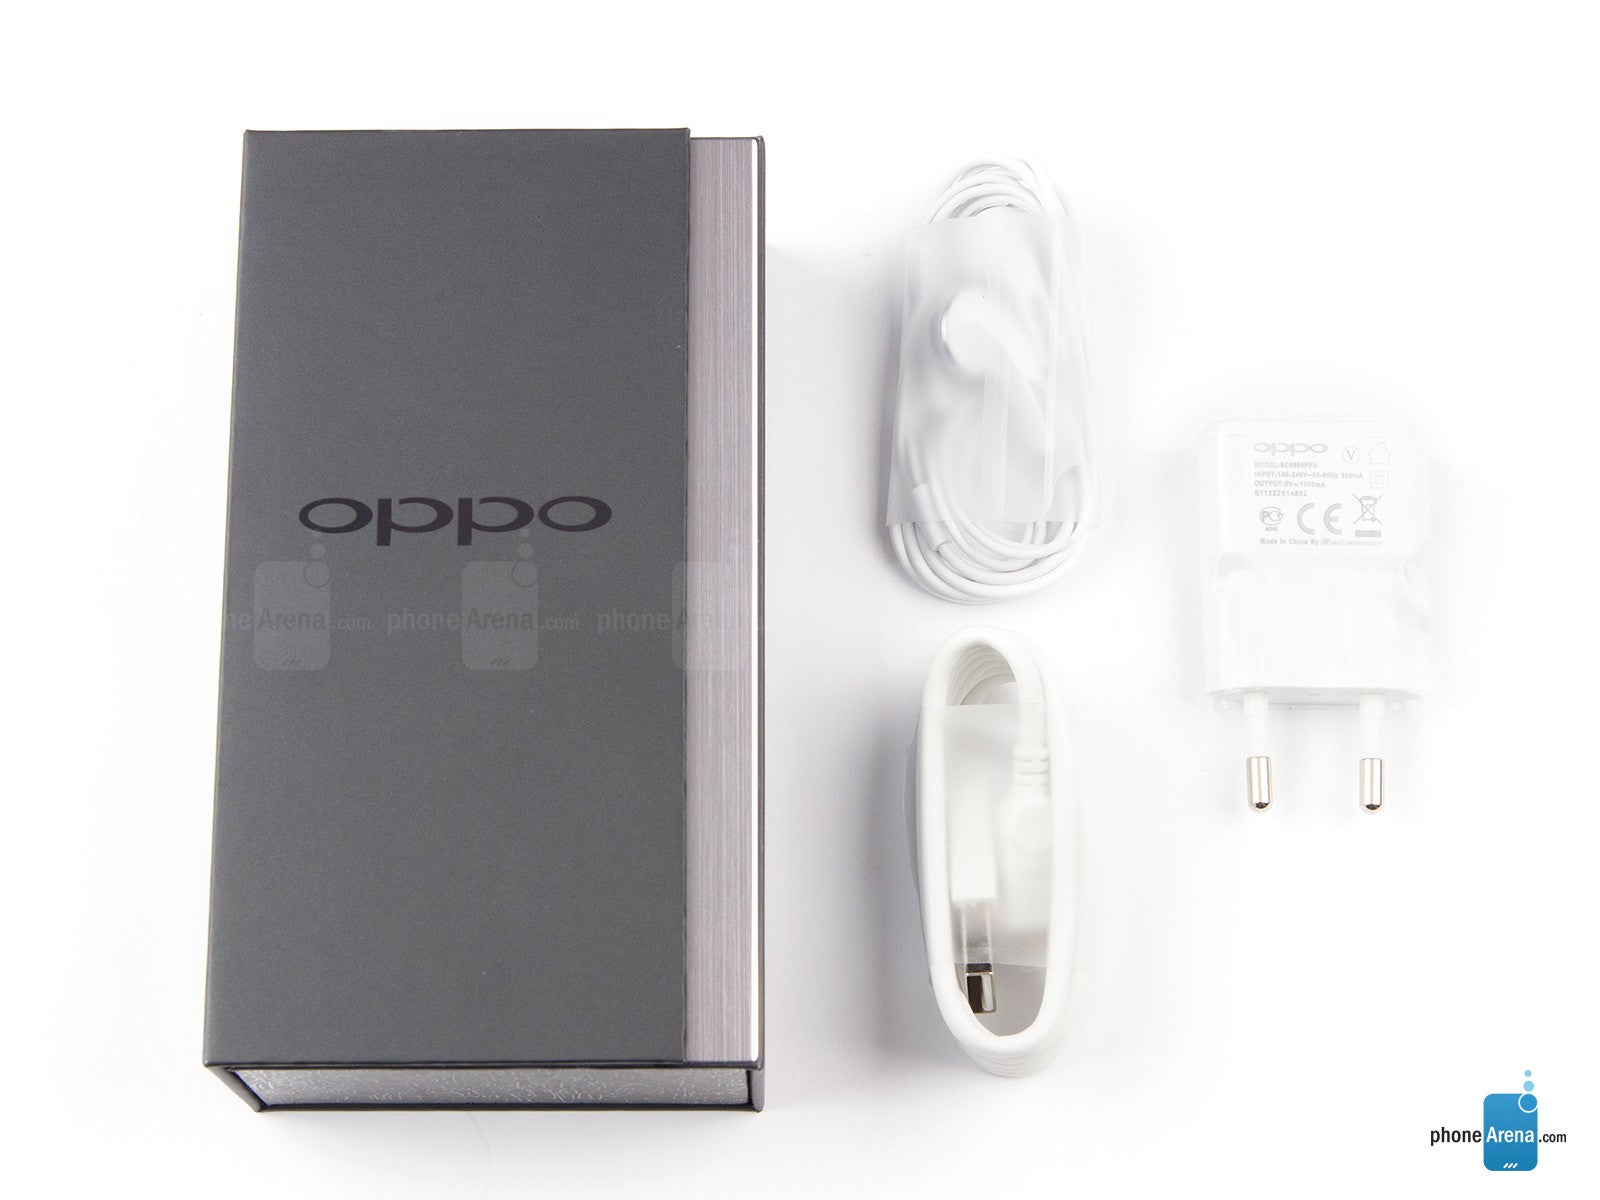 Oppo R819 Review